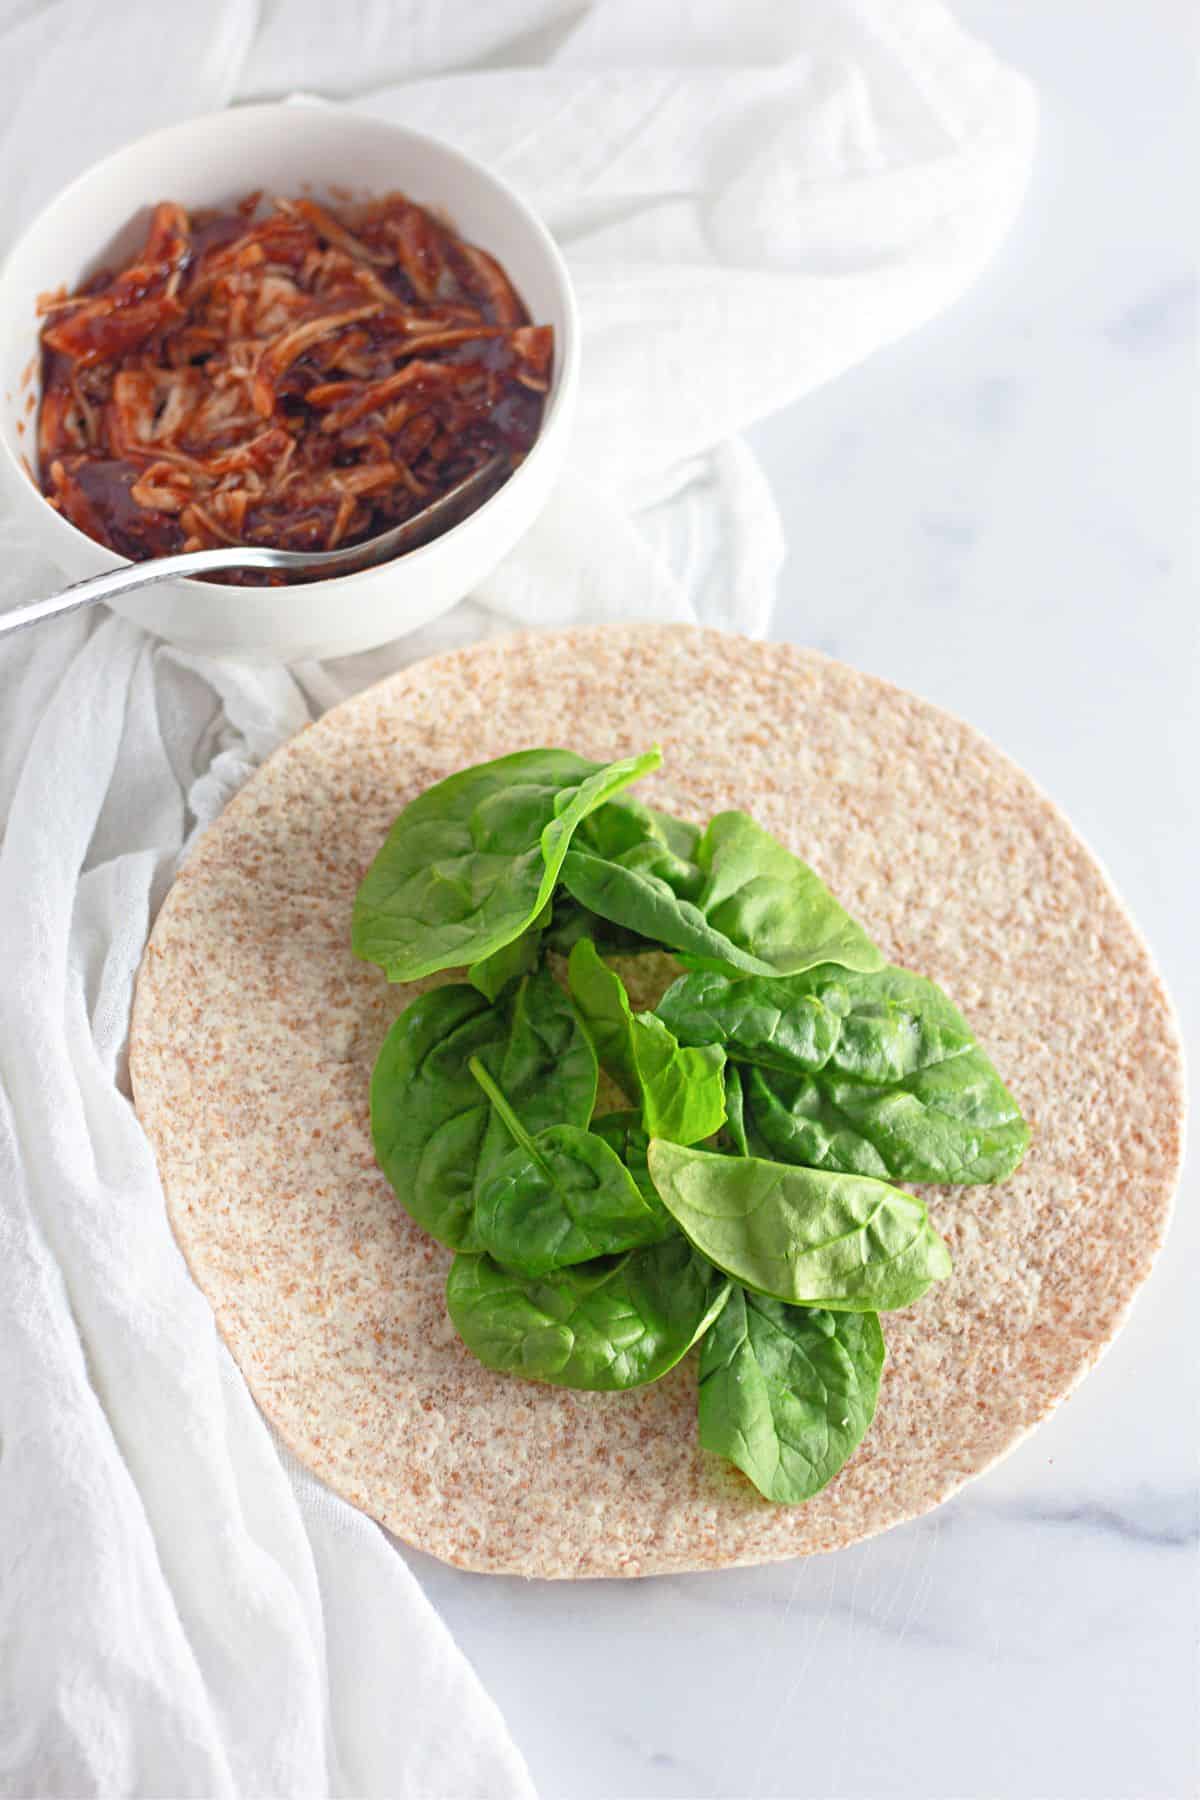 A wrap with spinach and a bowl of BBQ chicken.